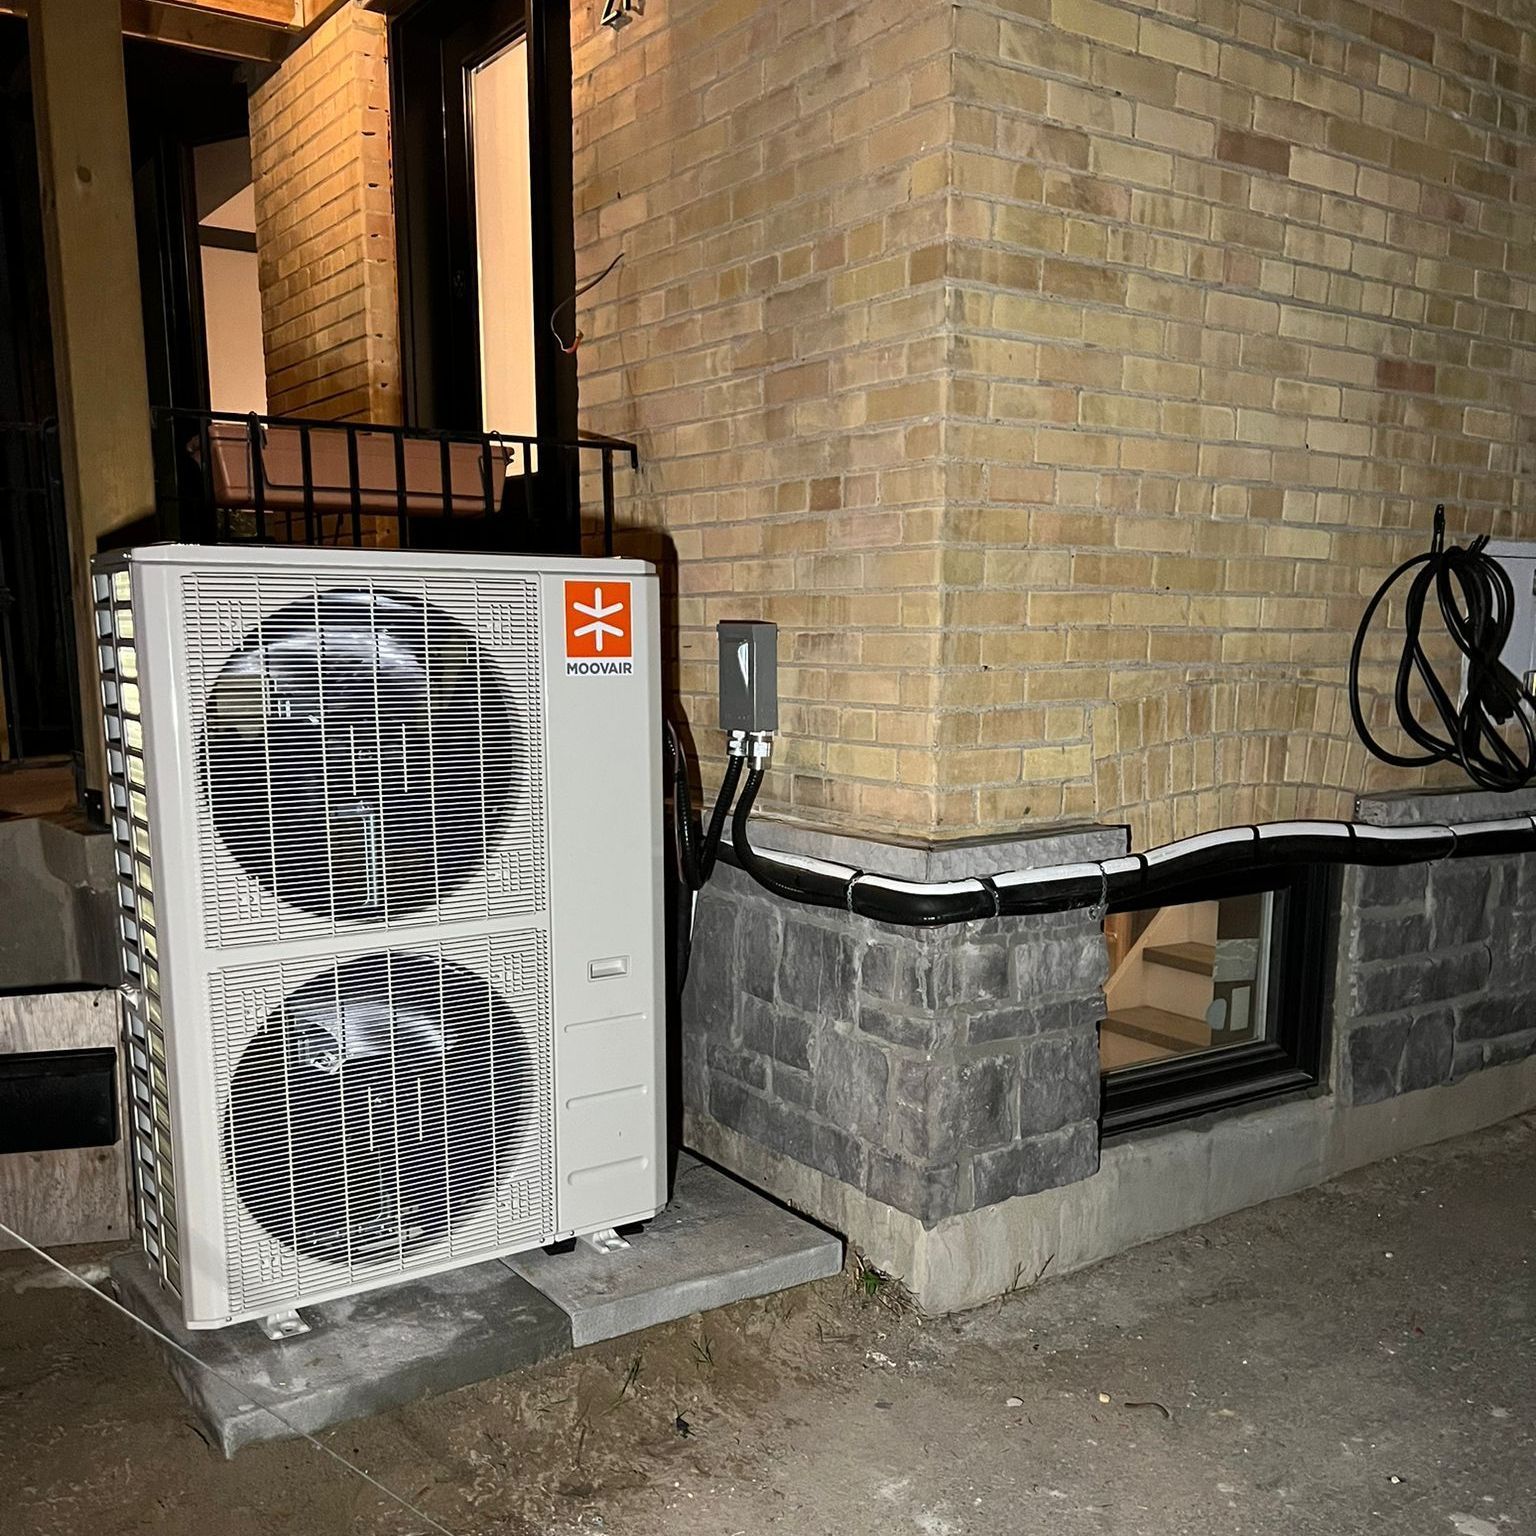 a large heat pump is sitting on the side of a brick building.